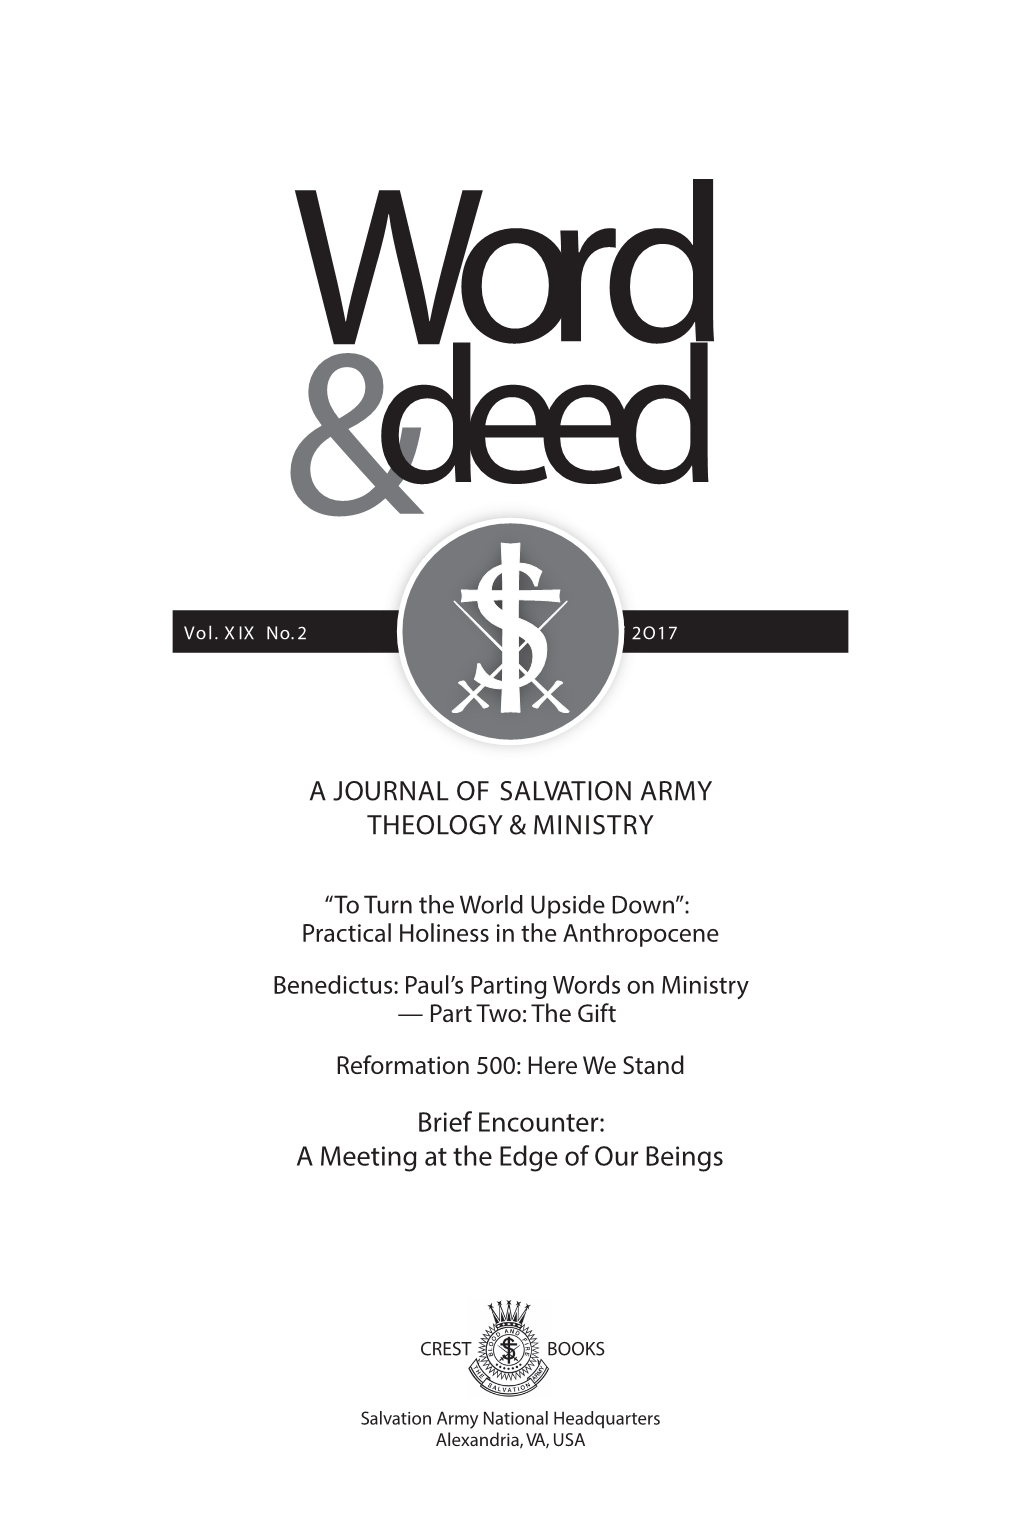 A Journal of Salvation Army Theology & Ministry